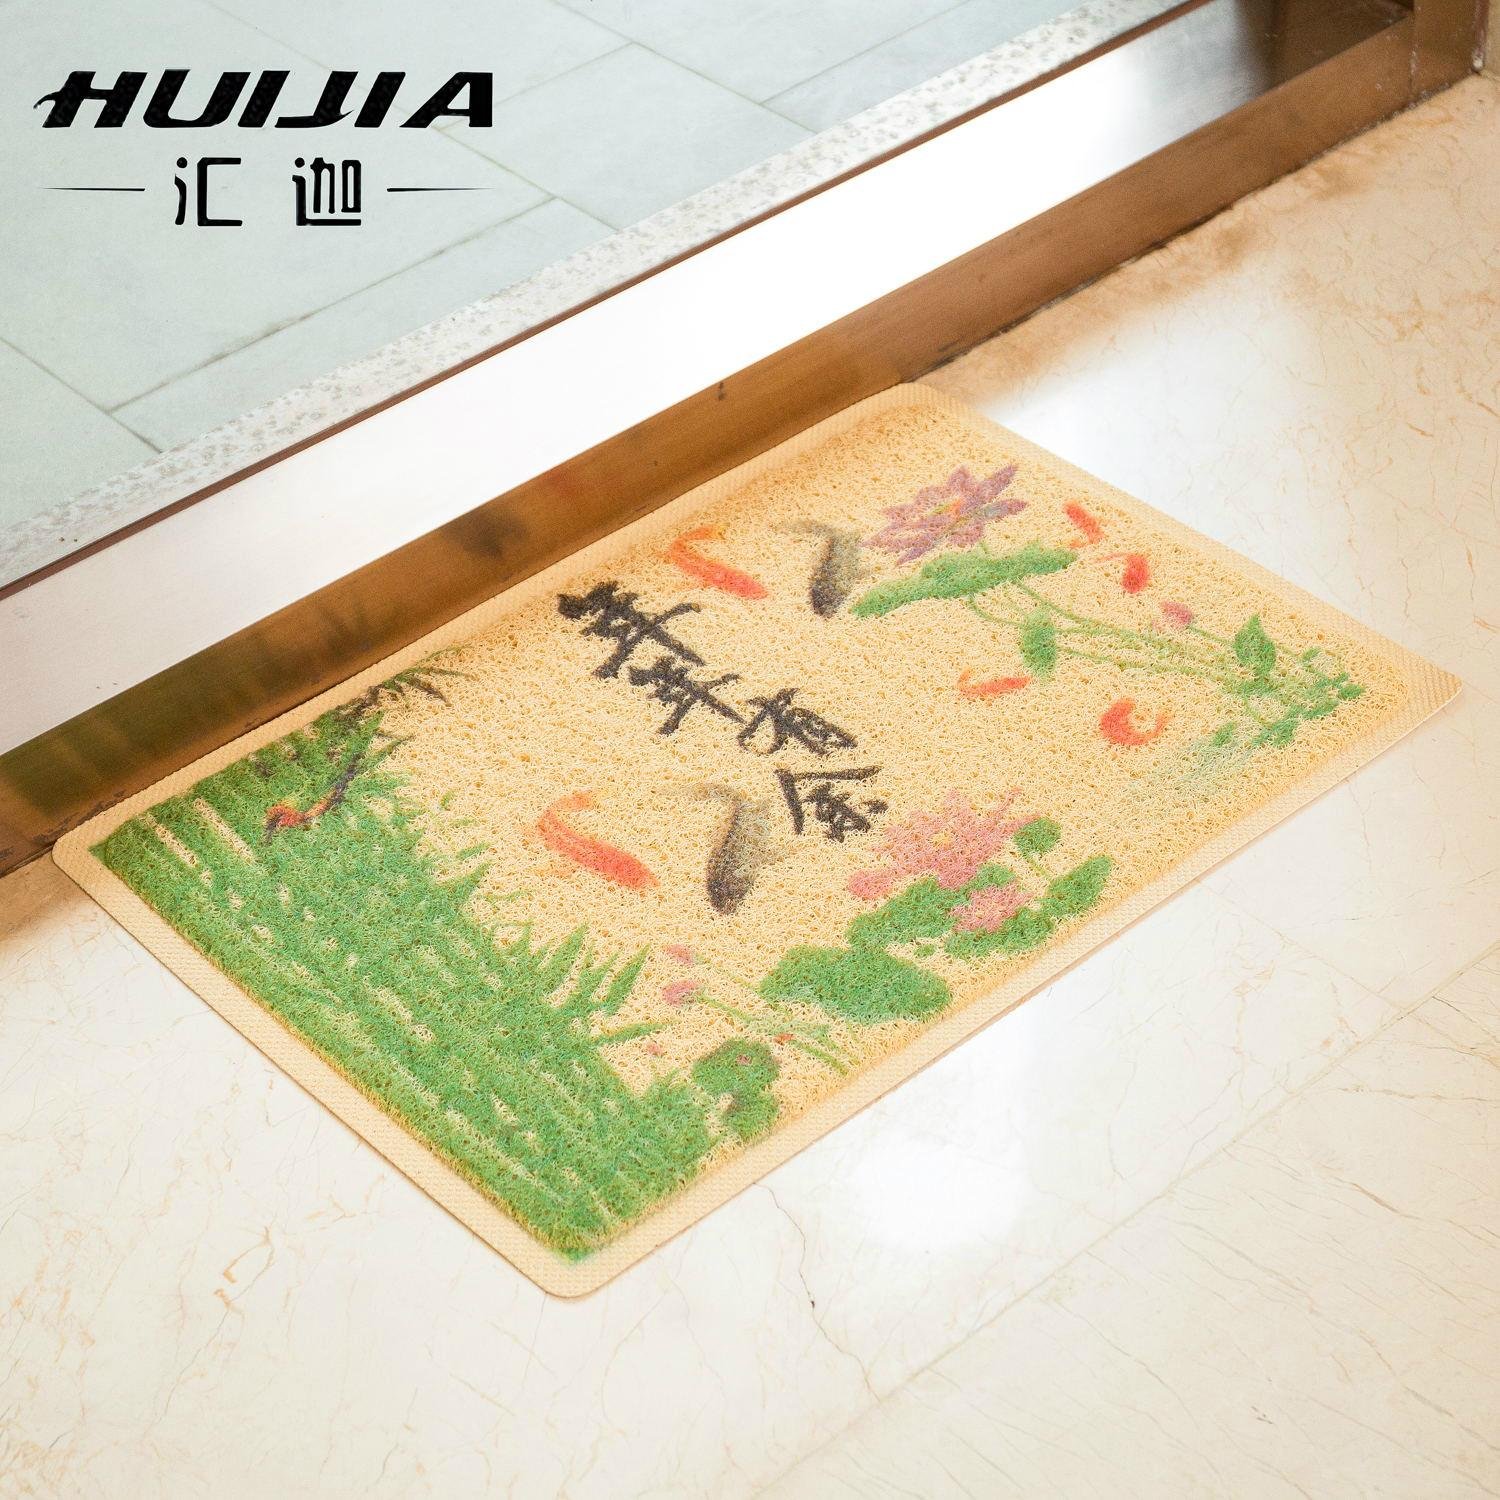 New product colorful printed pvc coil mat outdoor mat 